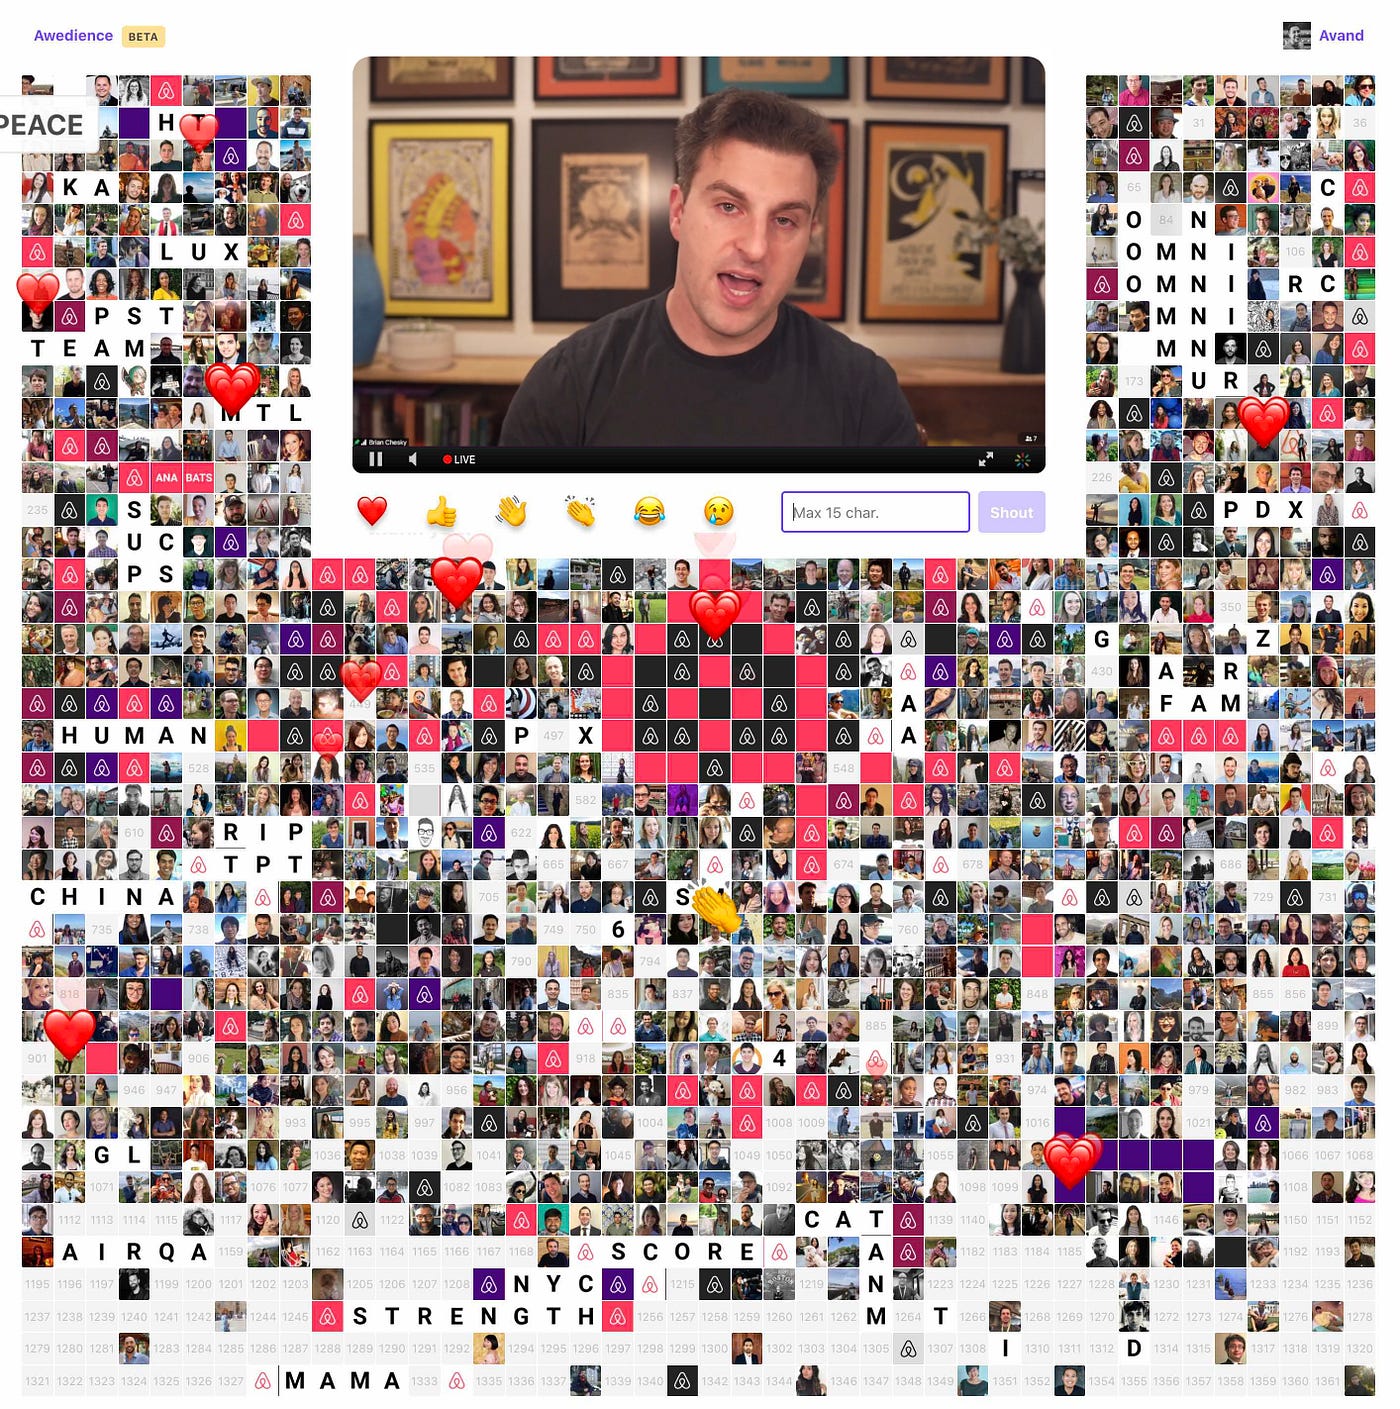 A screenshot of Awedience during an all-company meeting. Brian Chesky, CEO, is in the center and is surrounded by thousands of employees represented by tiny squares. Each square is either a picture of the employee, a color, or a letter that people have arranged to spell words or draw shapes. Emojis are captured emerging from some of the seats.